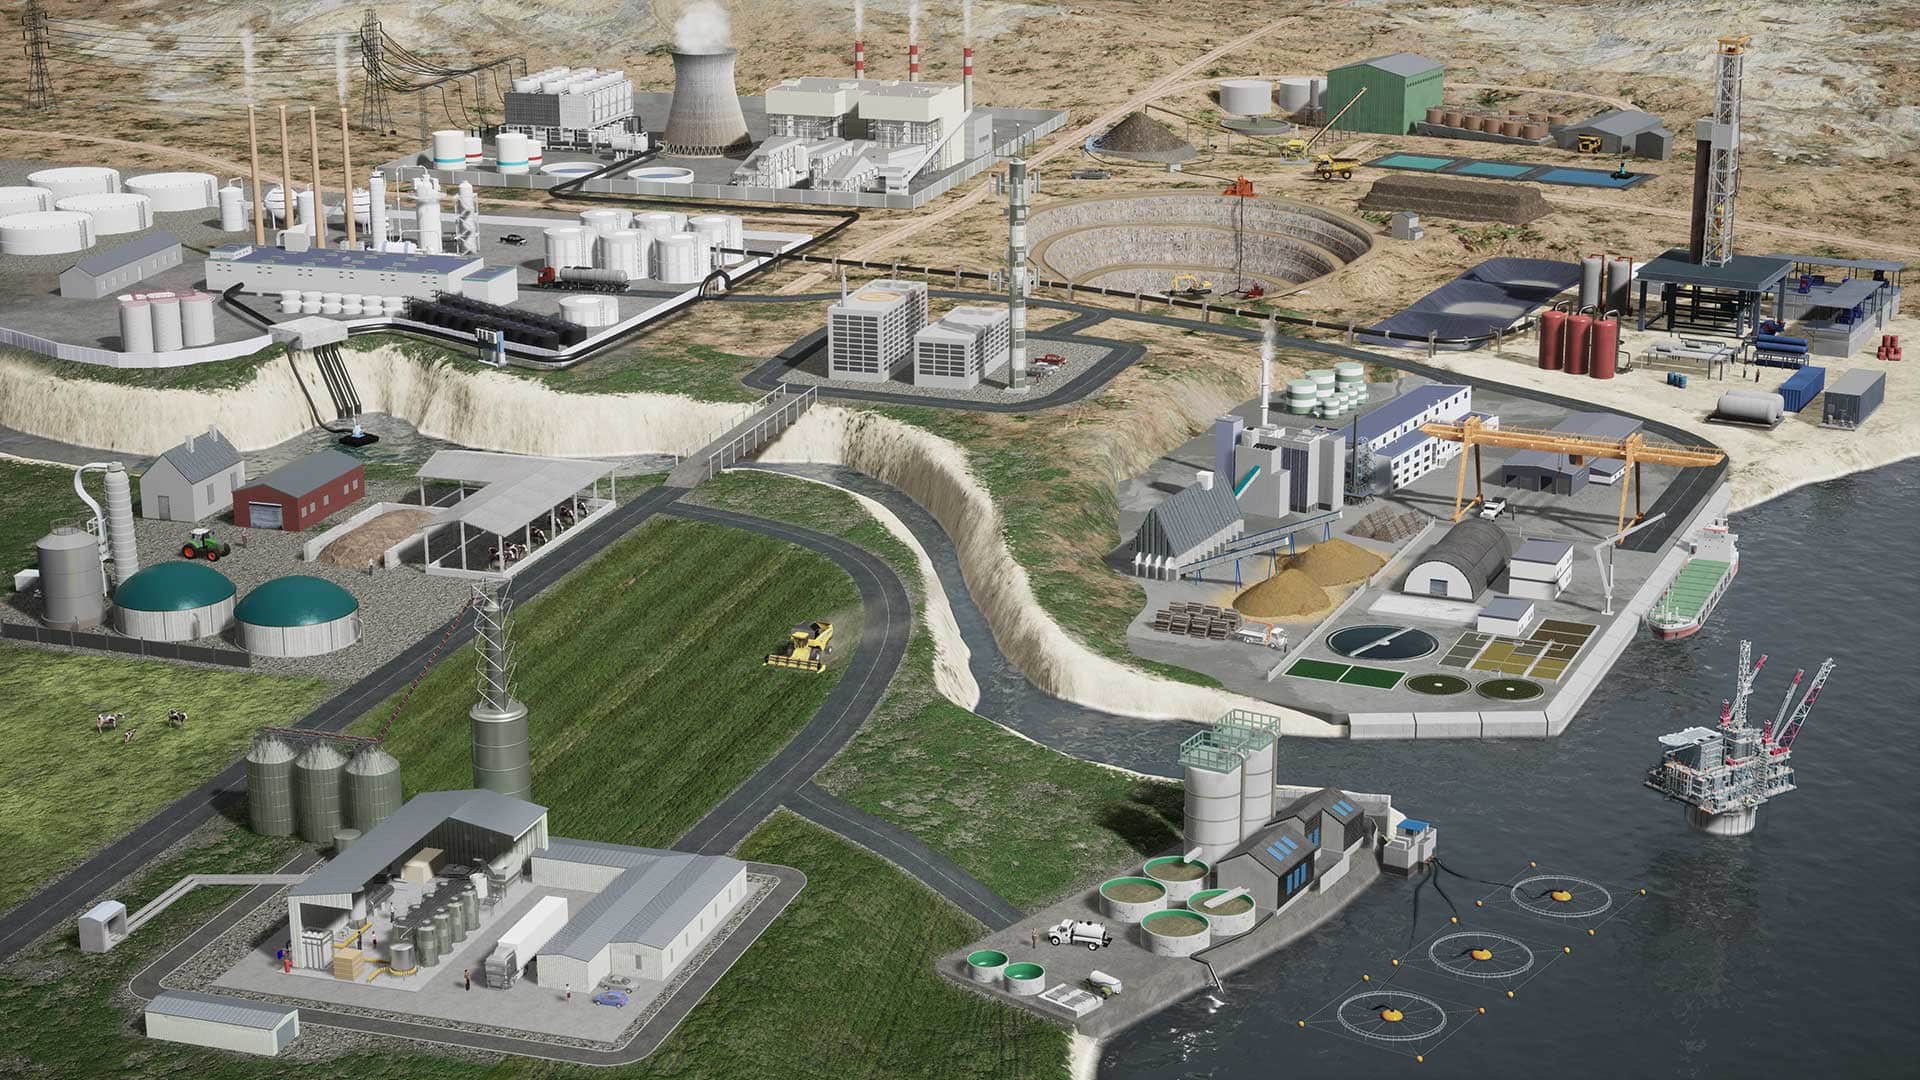 An overview of an industrial site in 3D animation.